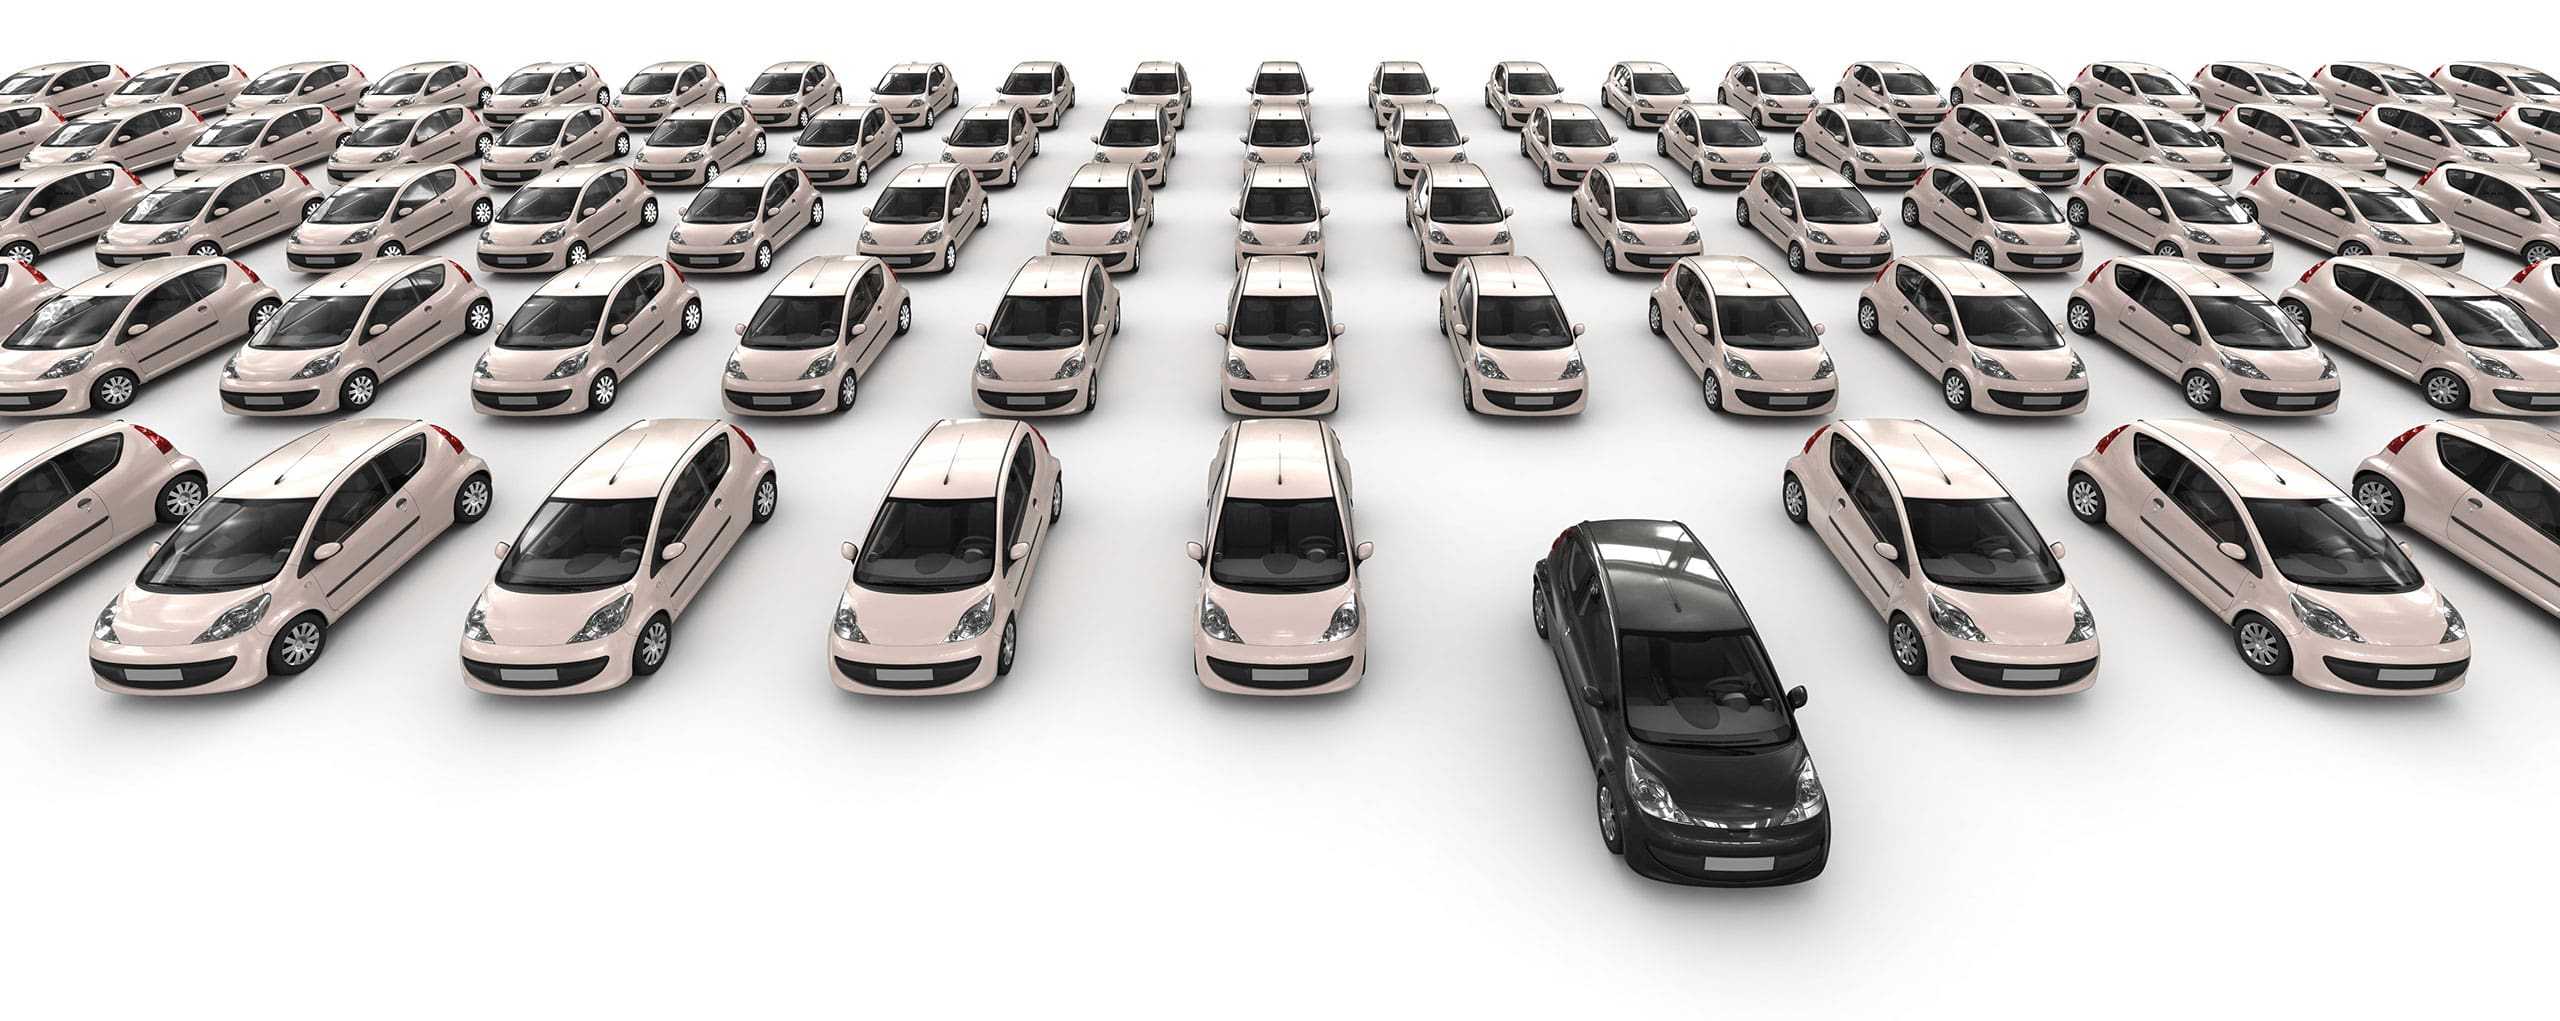 Fleet managers get peace of mind tracking auto recalls.